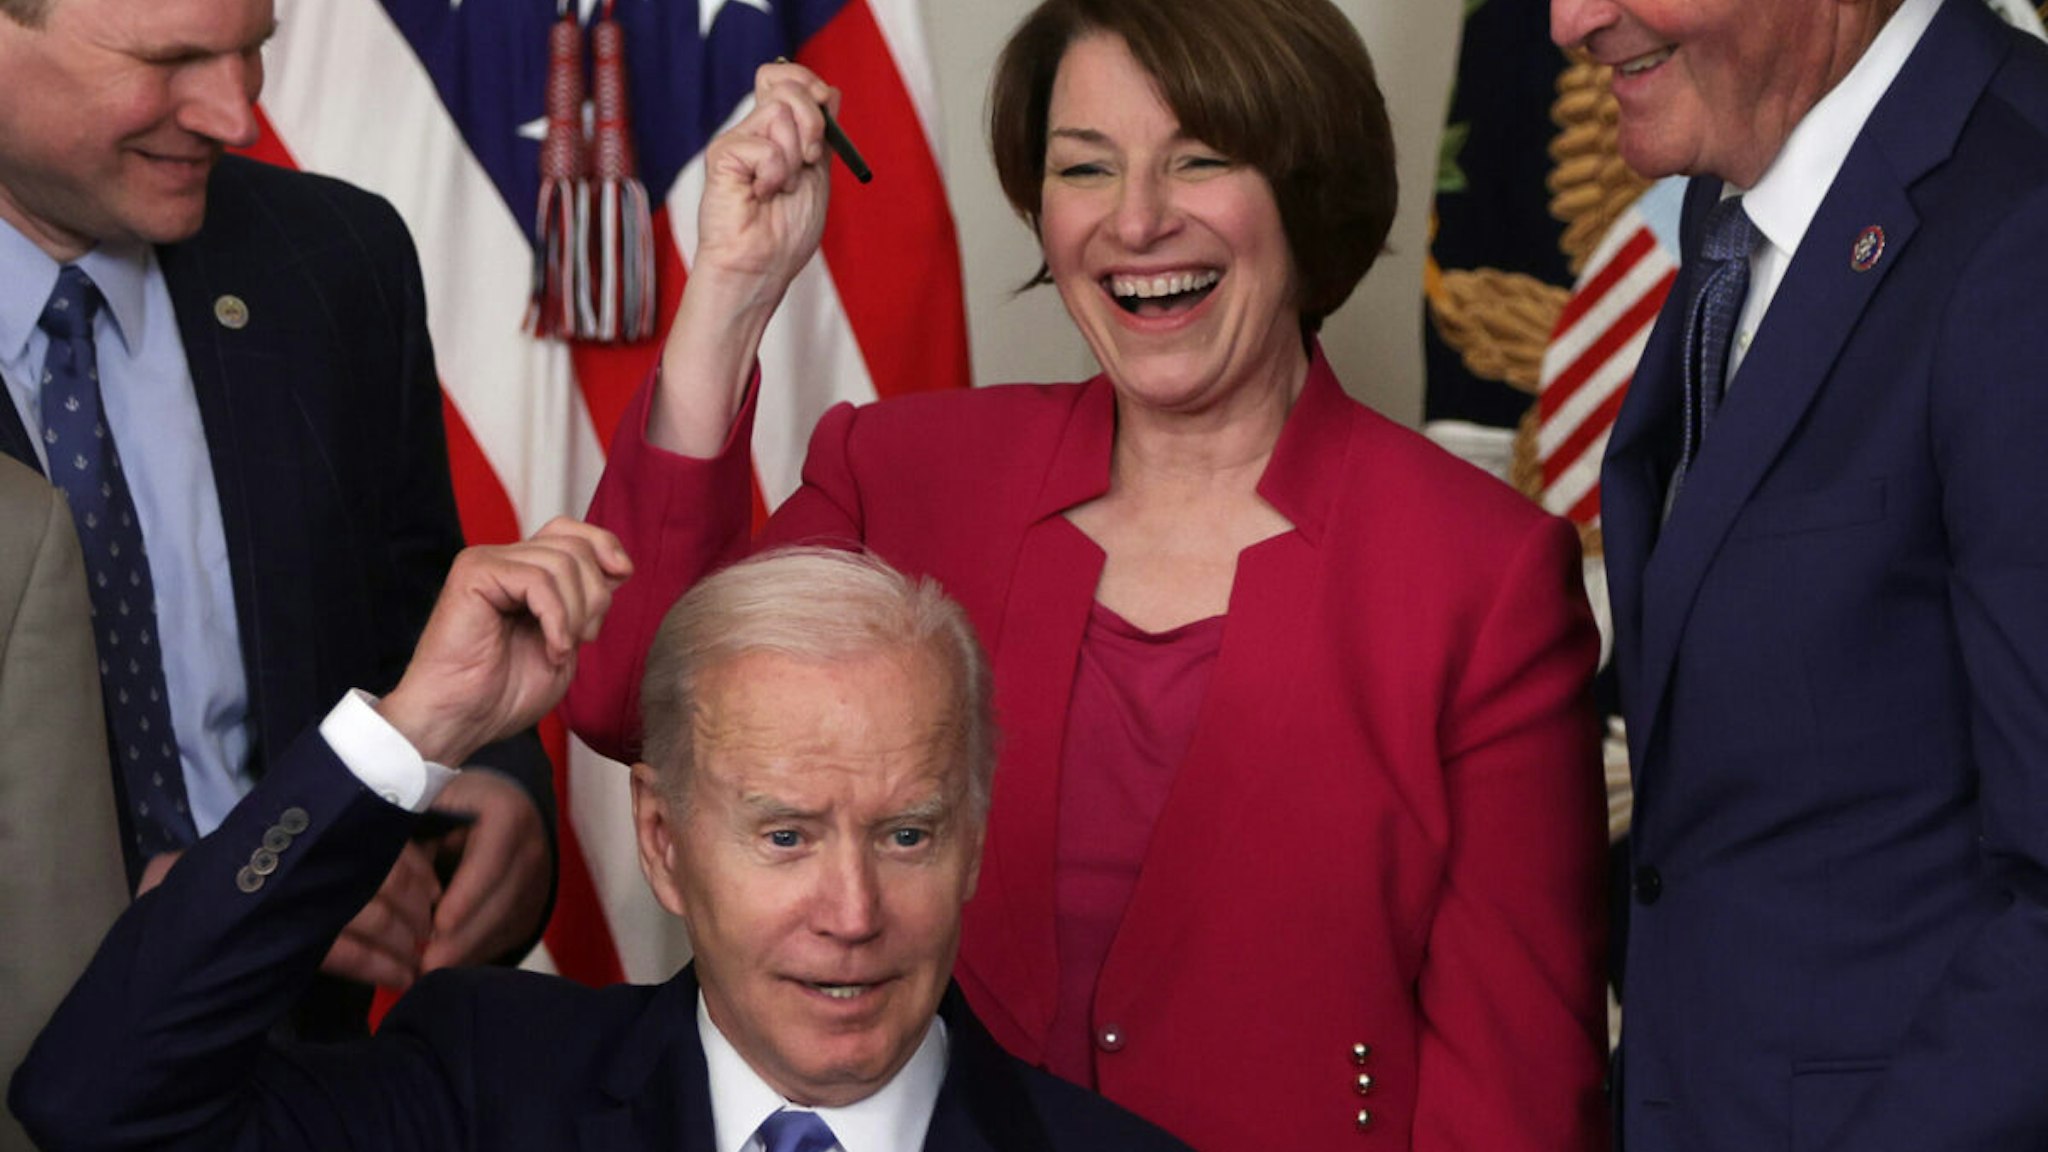 U.S. President Joe Biden gives Sen. Amy Klobuchar (D-MN) (2nd R) his signing pen as Rep. John Garamendi (D-CA) (R) looks on during a bill signing event at the State Dining Room of the White House June 16, 2022 in Washington, DC.